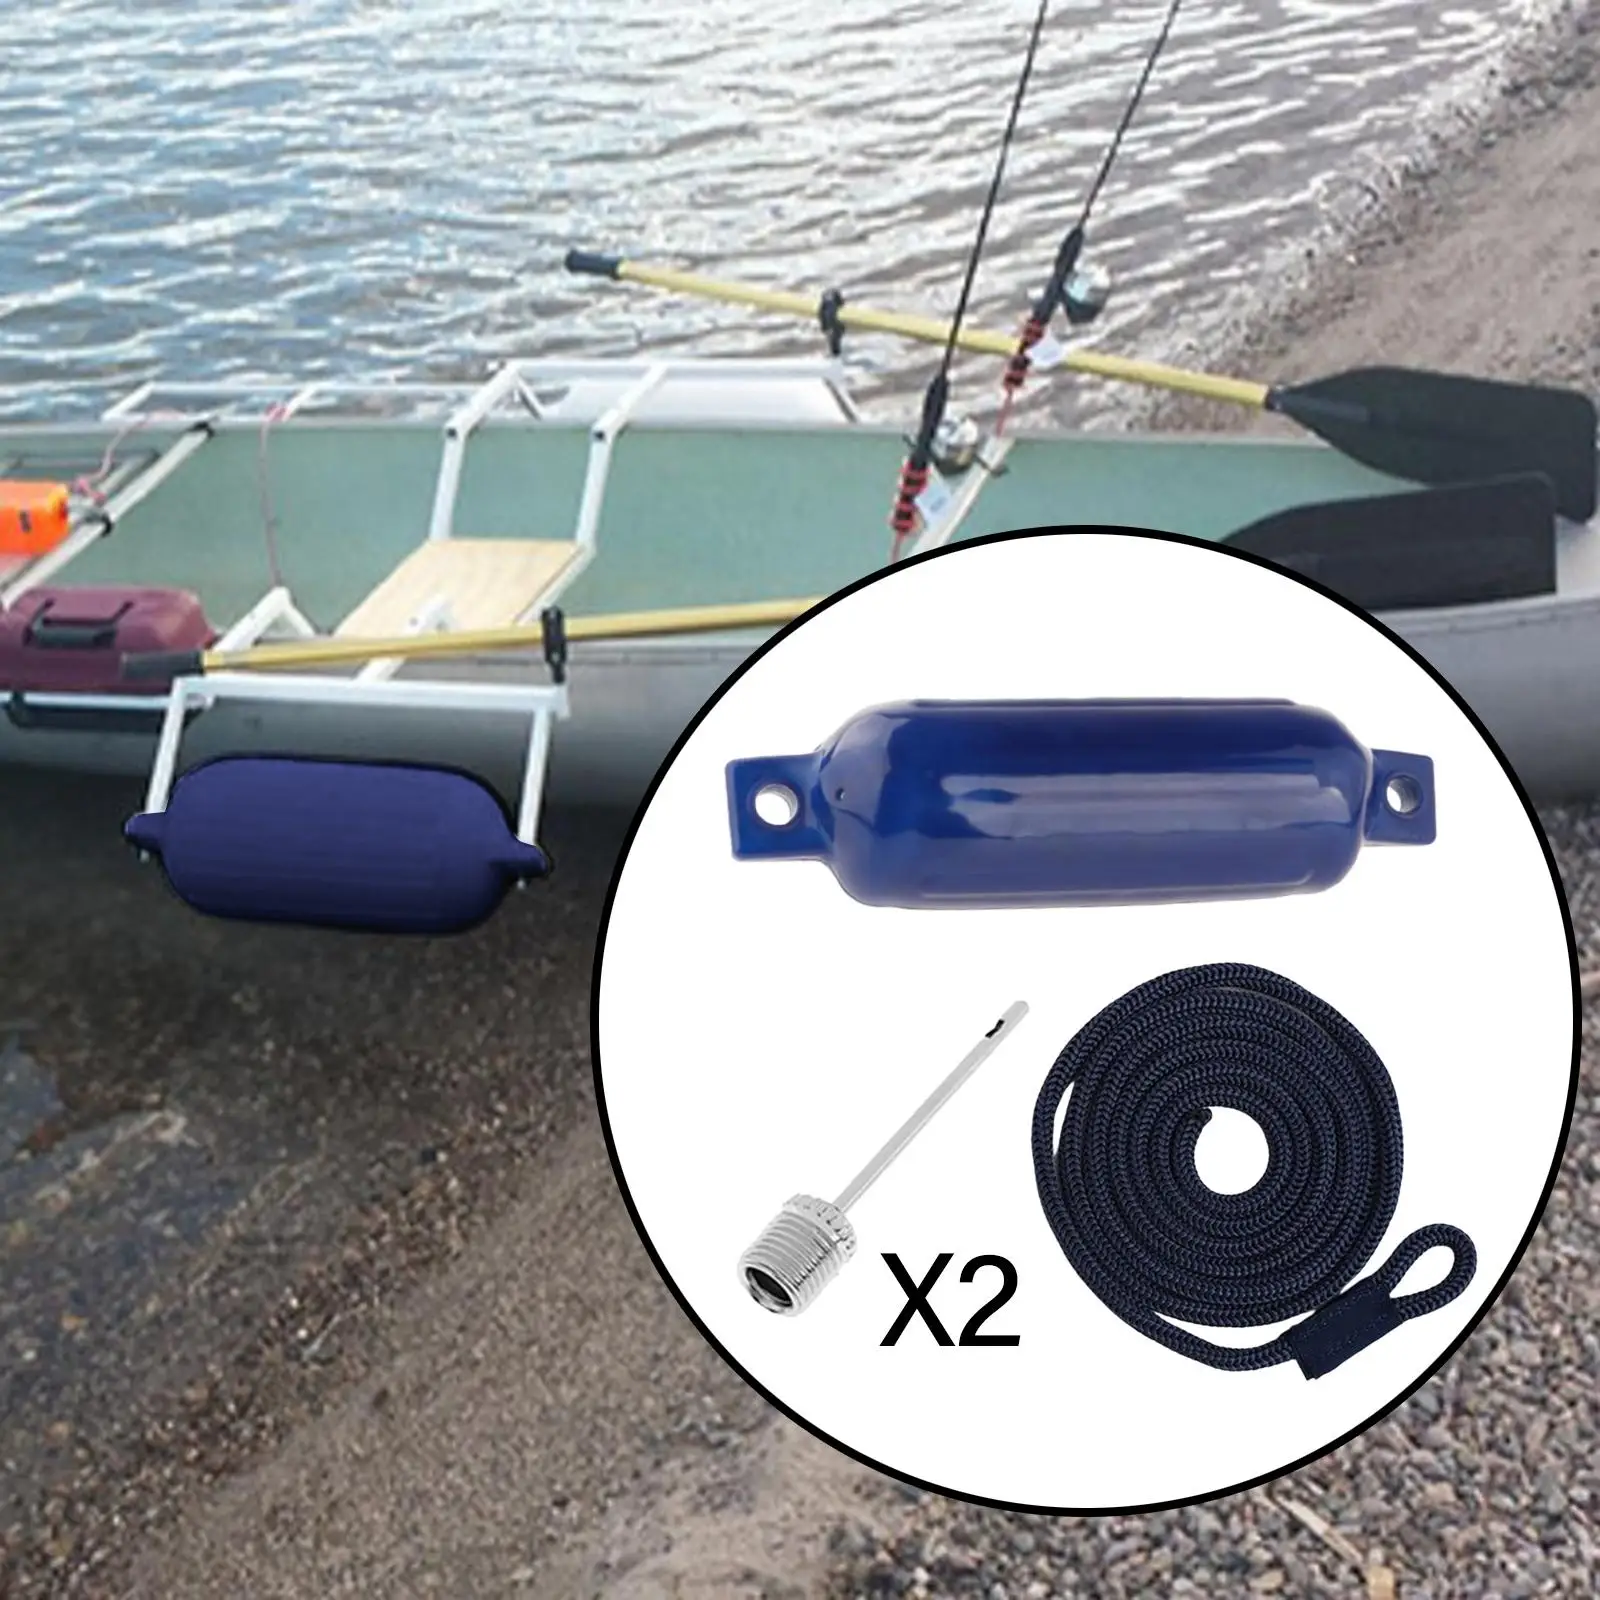 Boat Fender Kit with 2 Ropes Boat Fenders Bumpers Inflatable Marine Boat Bumper Protection for Docking Fishing Boats Yacht